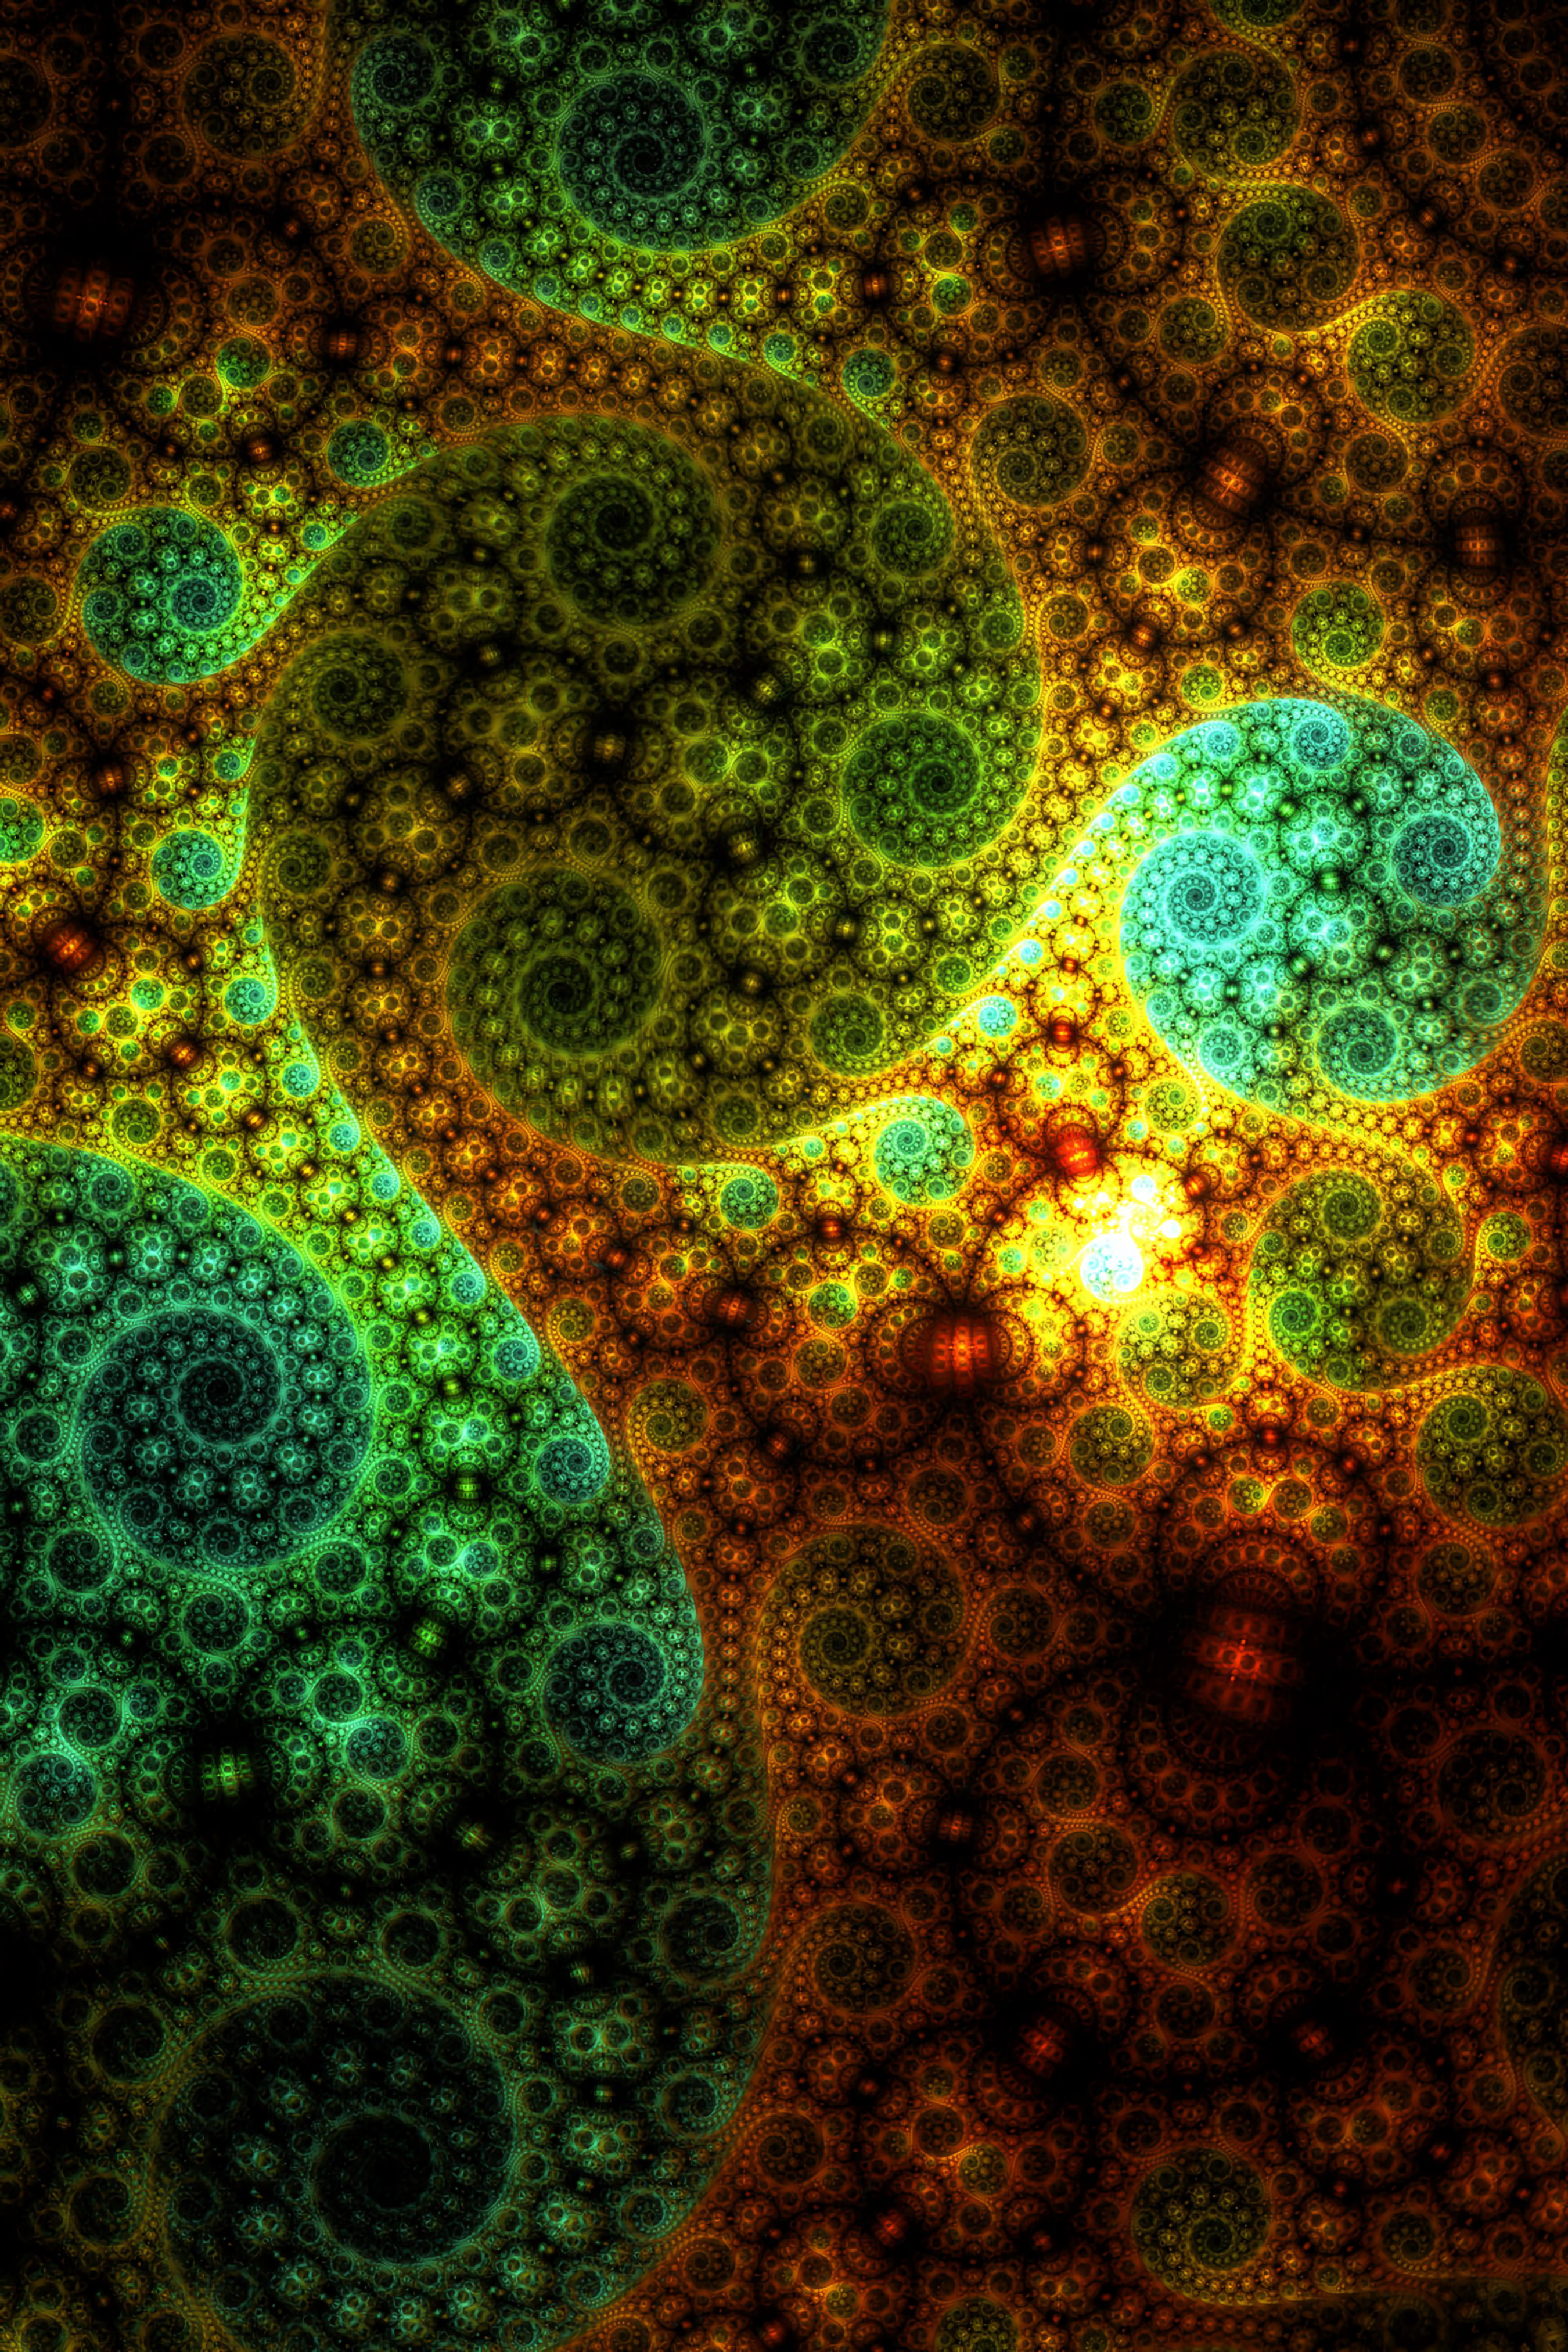 multicolored, abstract, motley, pattern, fractal, spiral, swirling, involute QHD